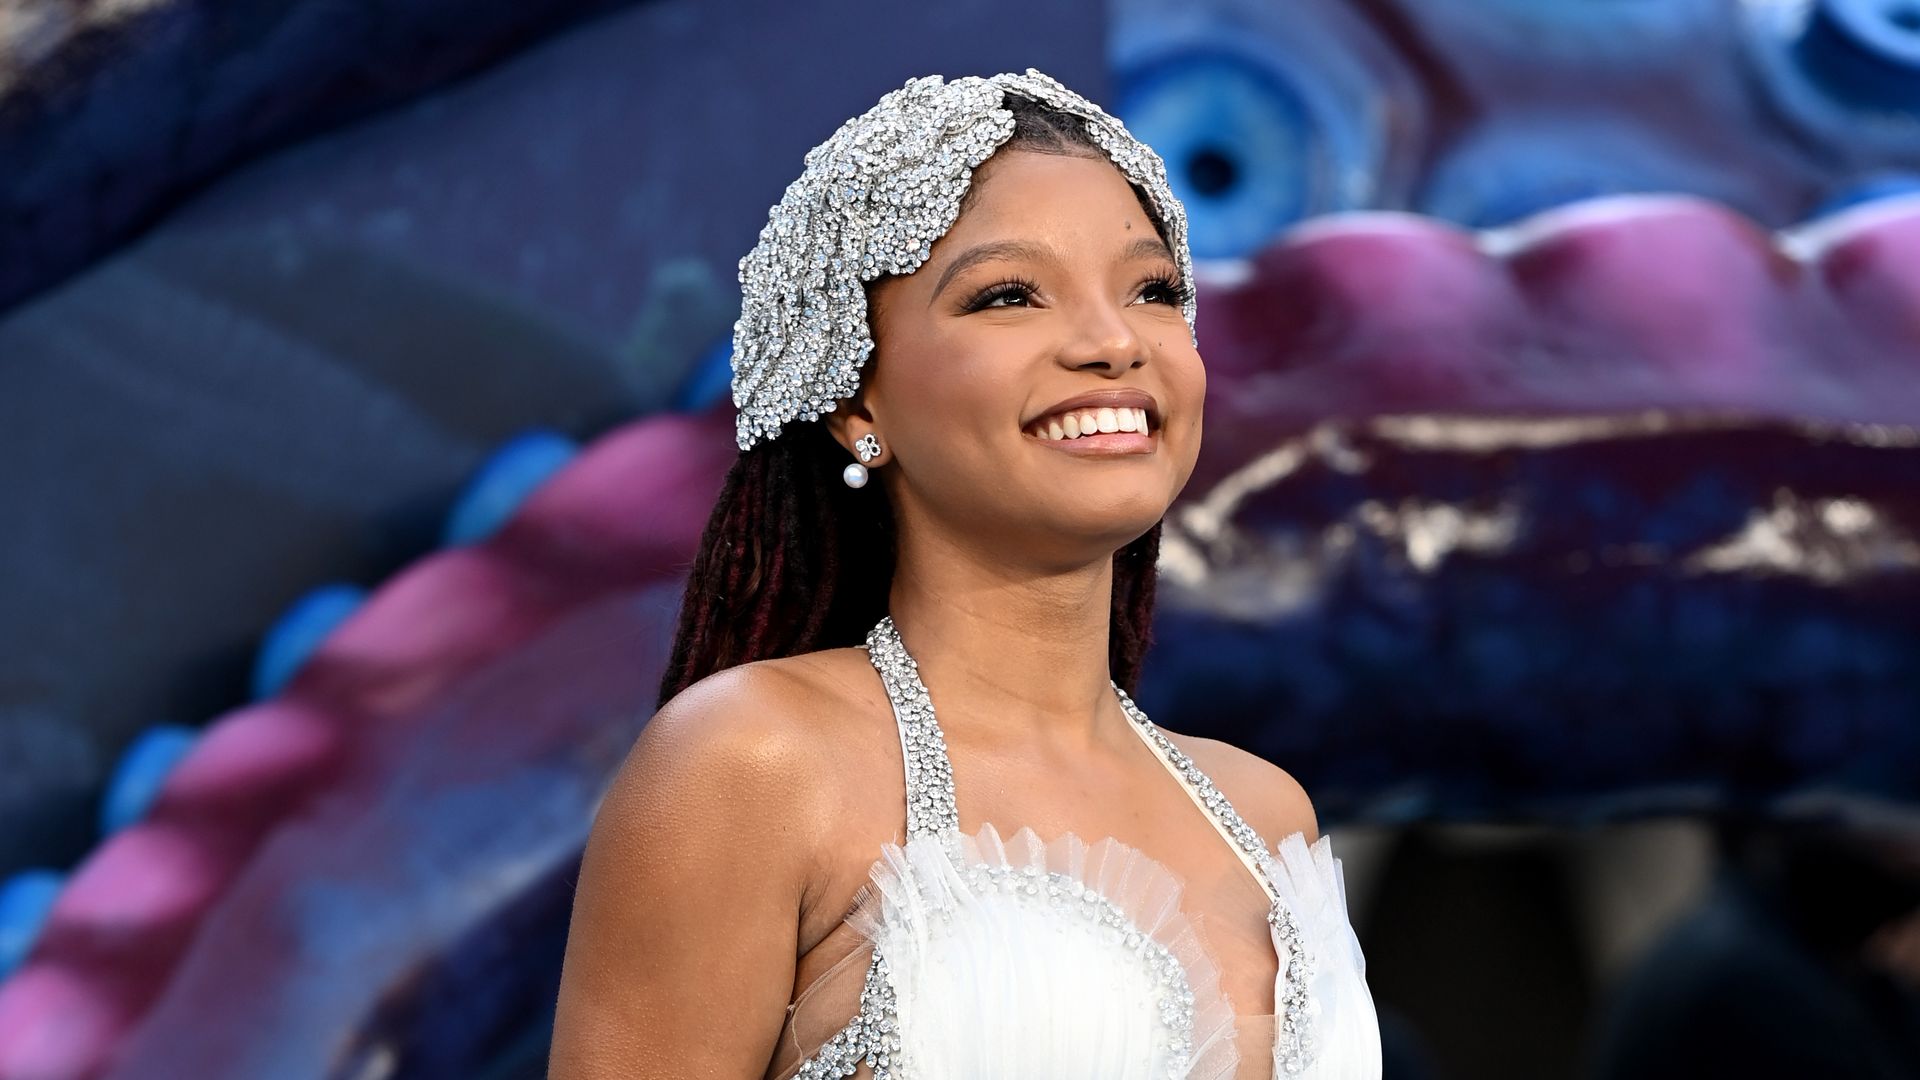 How Hair and Costume Help Bring Halle Bailey's Ariel to Life in